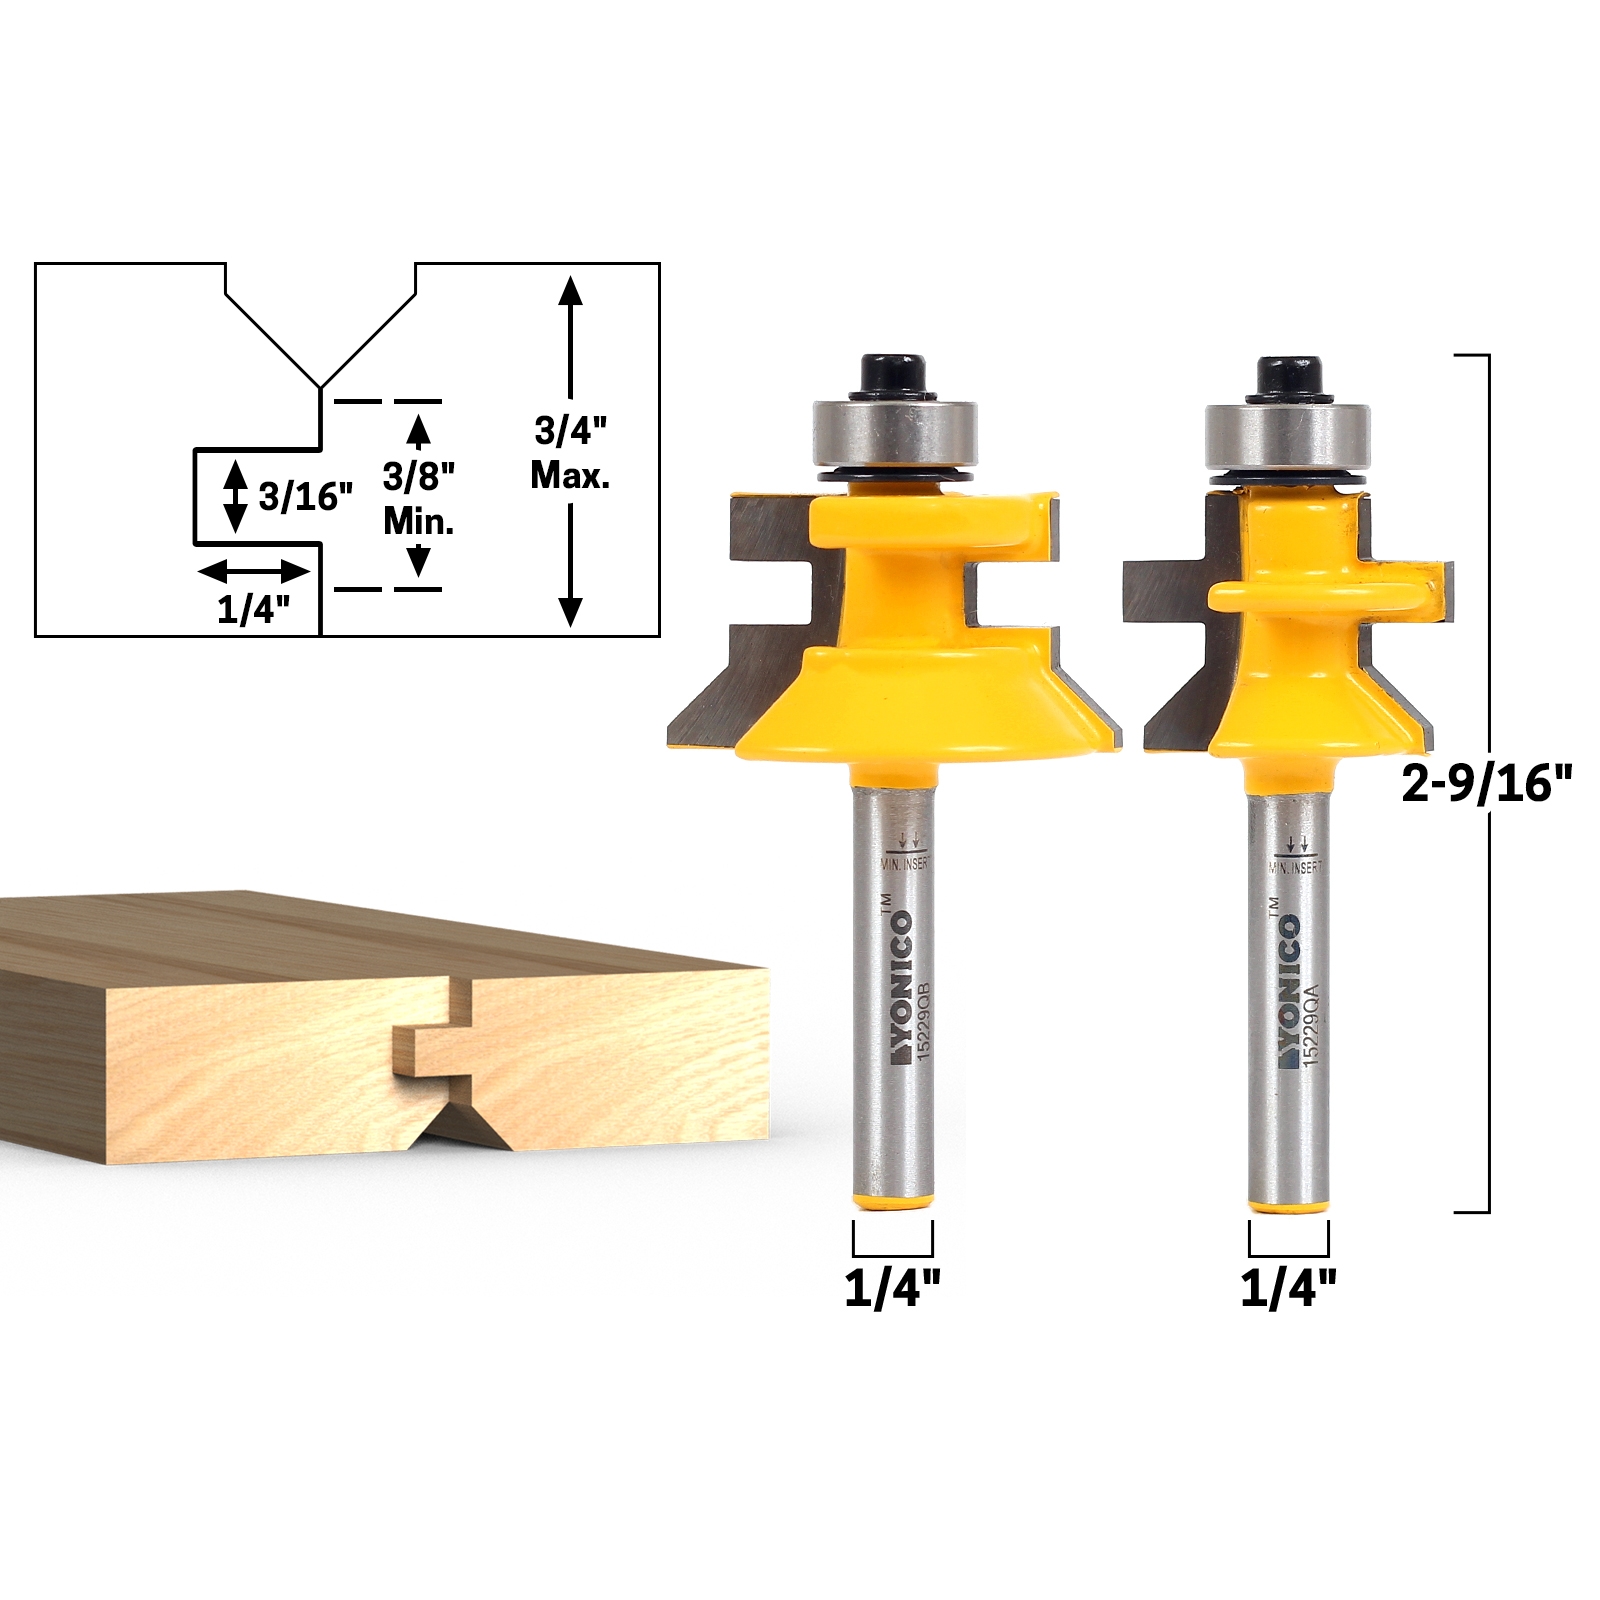 Yonico 15228q Yonico 15228q Tongue and Groove Router Bit Set 1/4 x 1/4 1/4 Shank, 